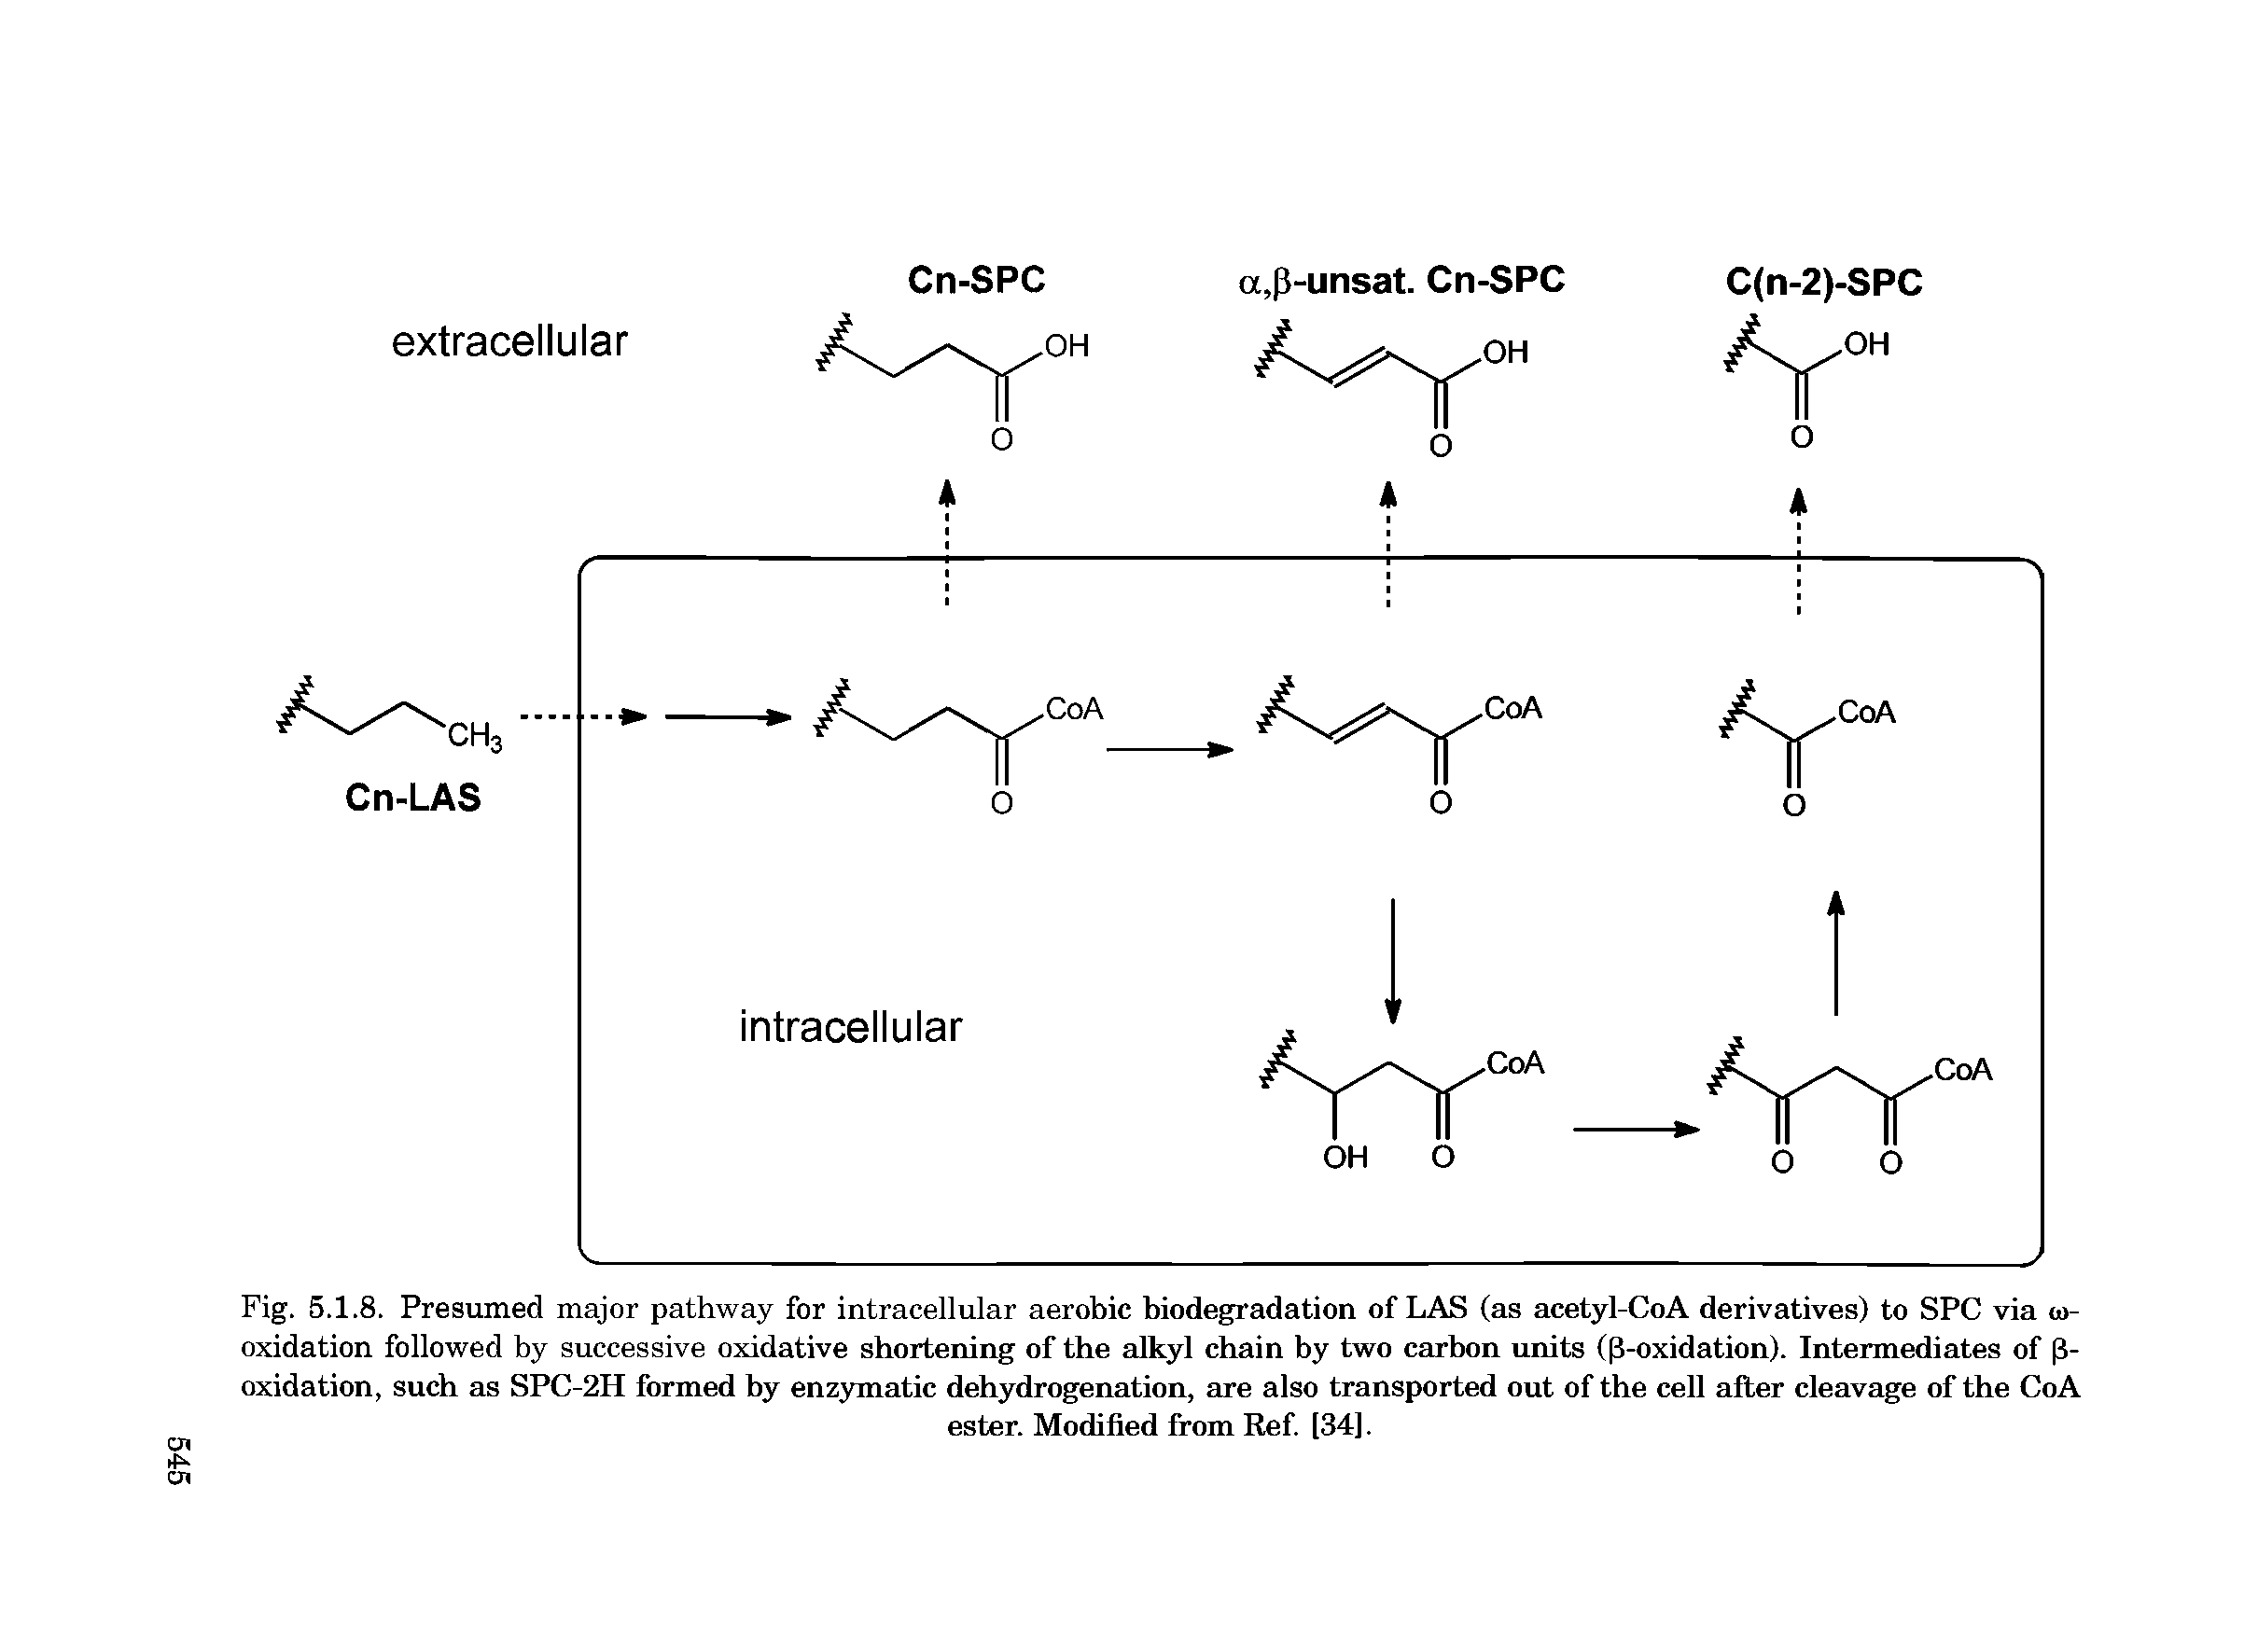 Fig. 5.1.8. Presumed major pathway for intracellular aerobic biodegradation of LAS (as acetyl-CoA derivatives) to SPC via w-oxidation followed by successive oxidative shortening of the alkyl chain by two carbon units ((3-oxidation). Intermediates of 13-oxidation, such as SPC-2H formed by enzymatic dehydrogenation, are also transported out of the cell after cleavage of the CoA...